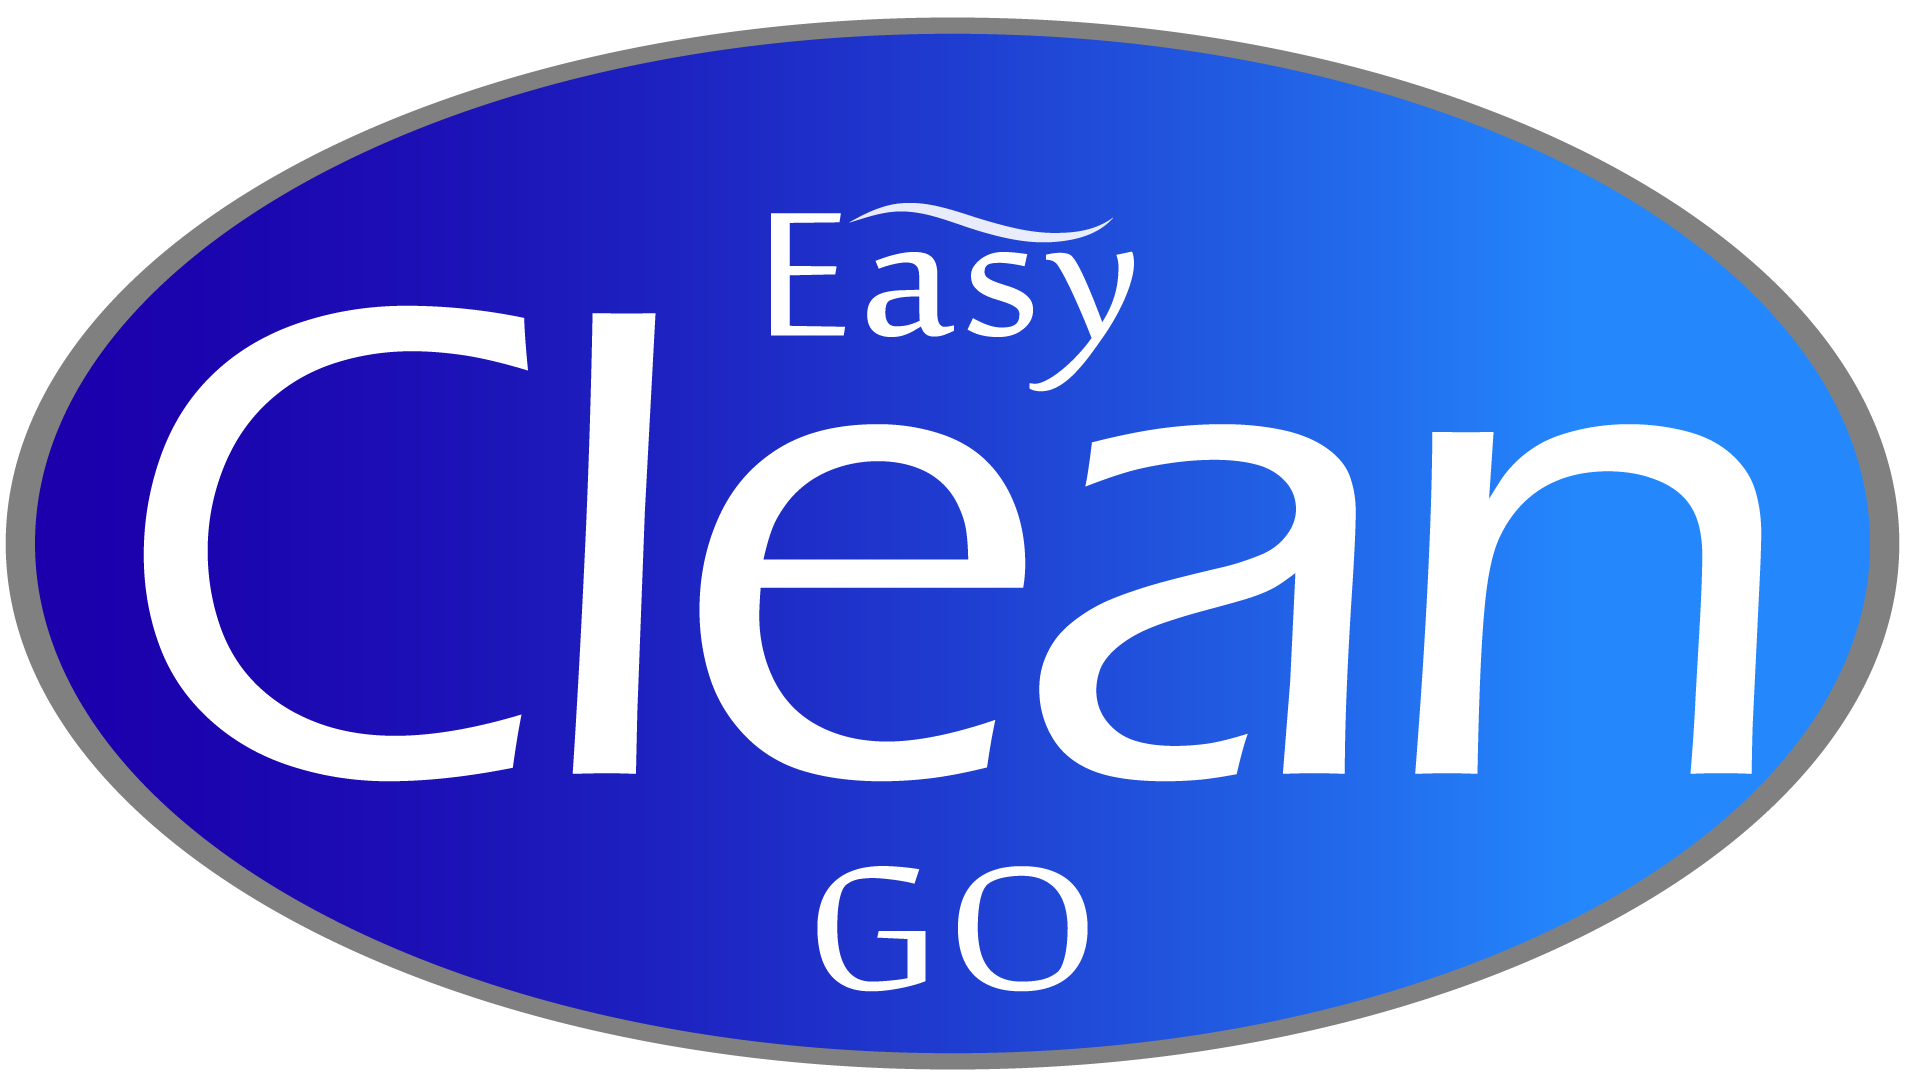 Easy Clean Go